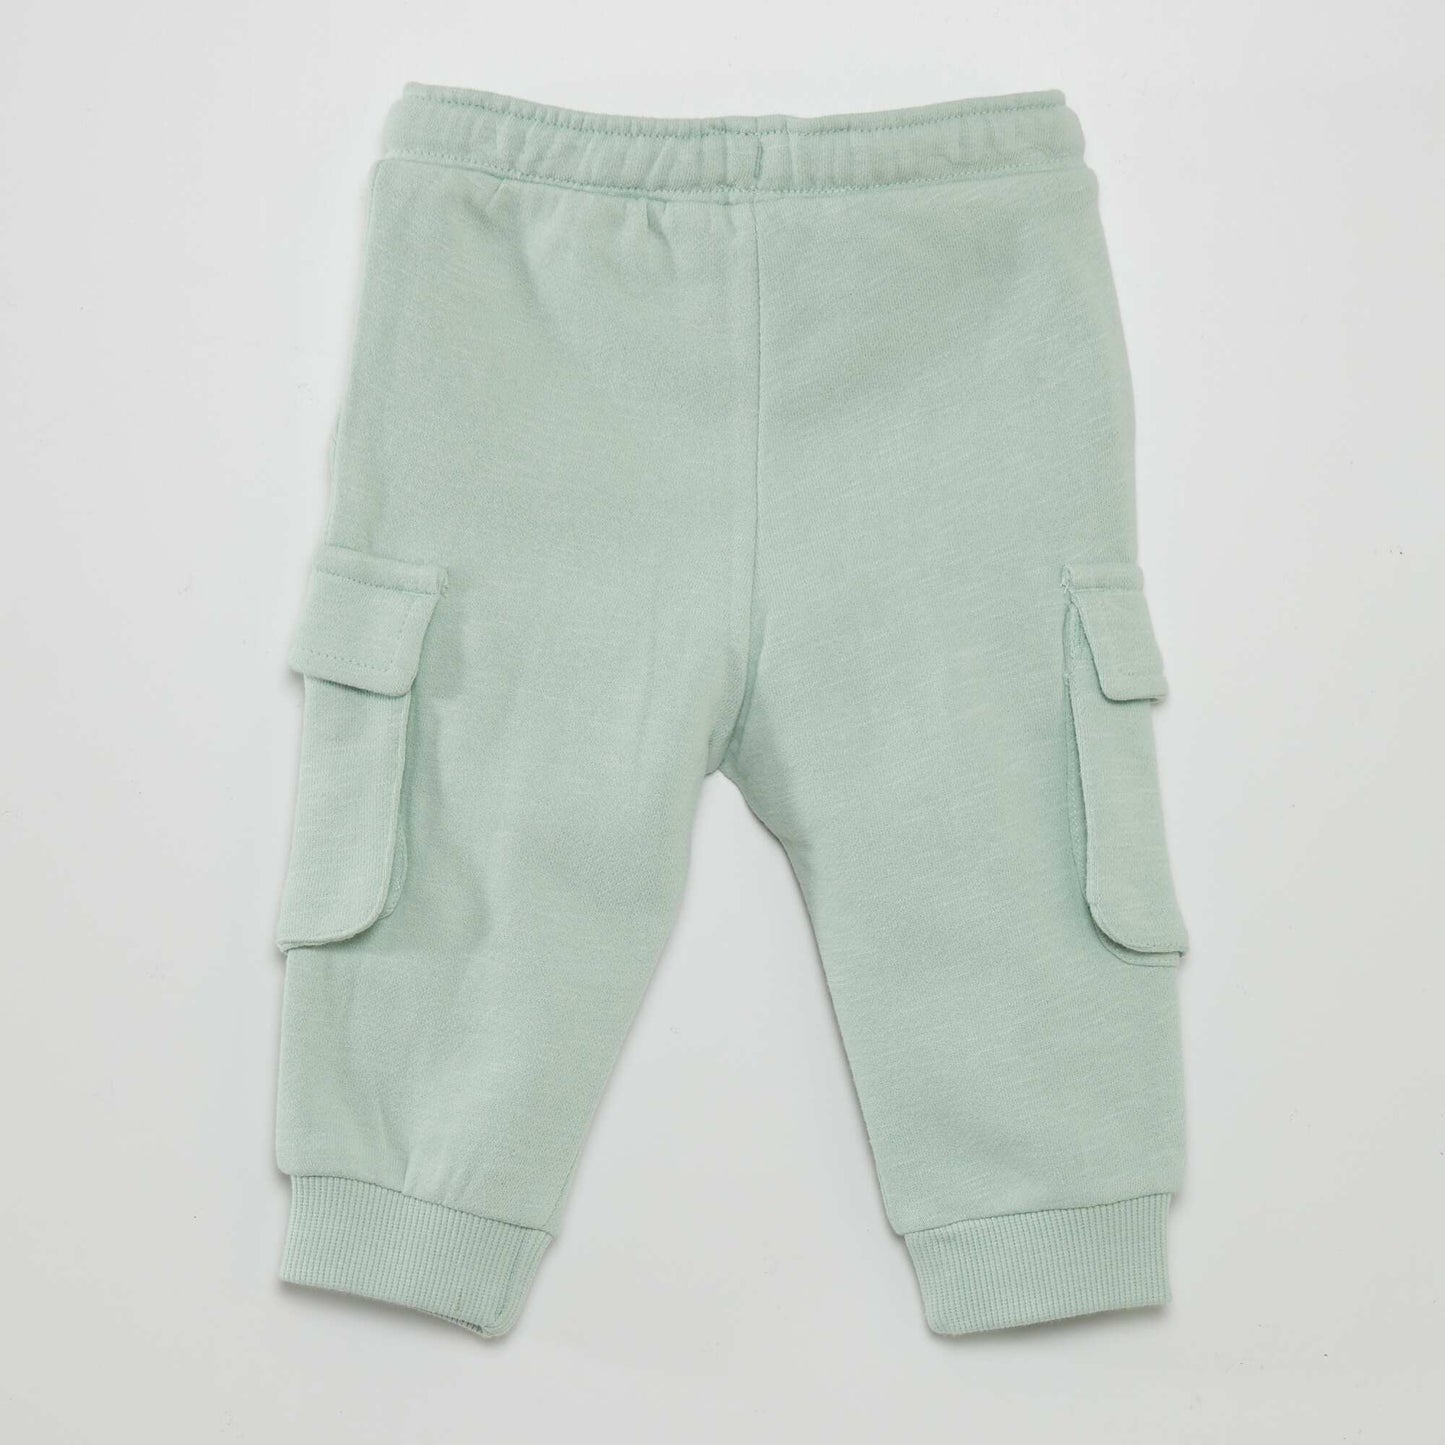 Sweatshirt fabric trousers with side pockets blue